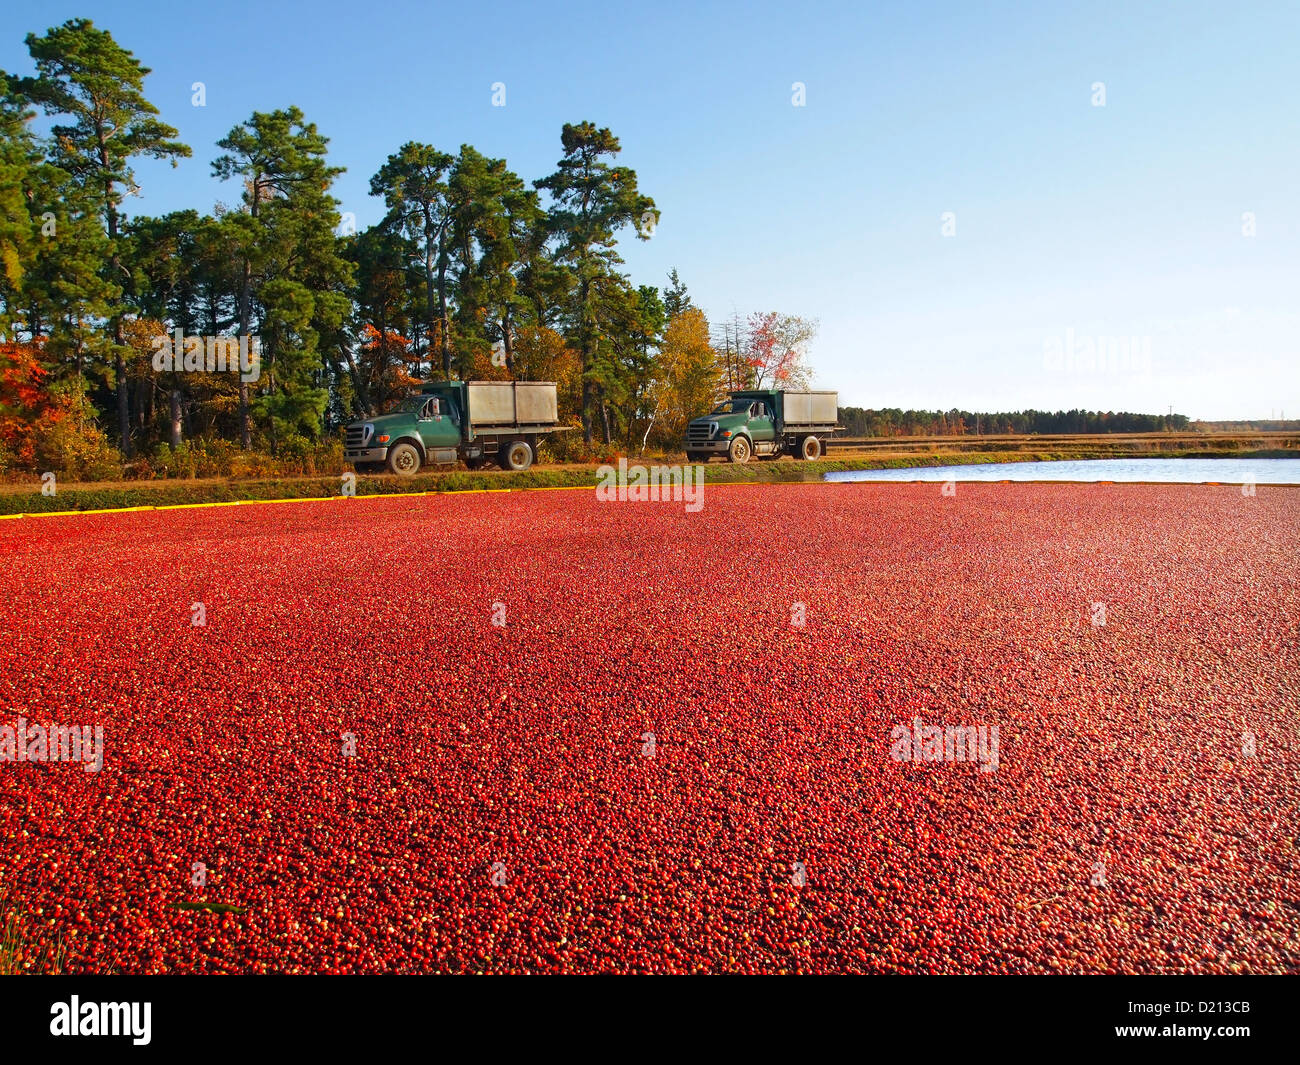 Landscape features a cranberry bog at harvest time with trucks waiting to transport the berries, and a big, blue sky background. Stock Photo